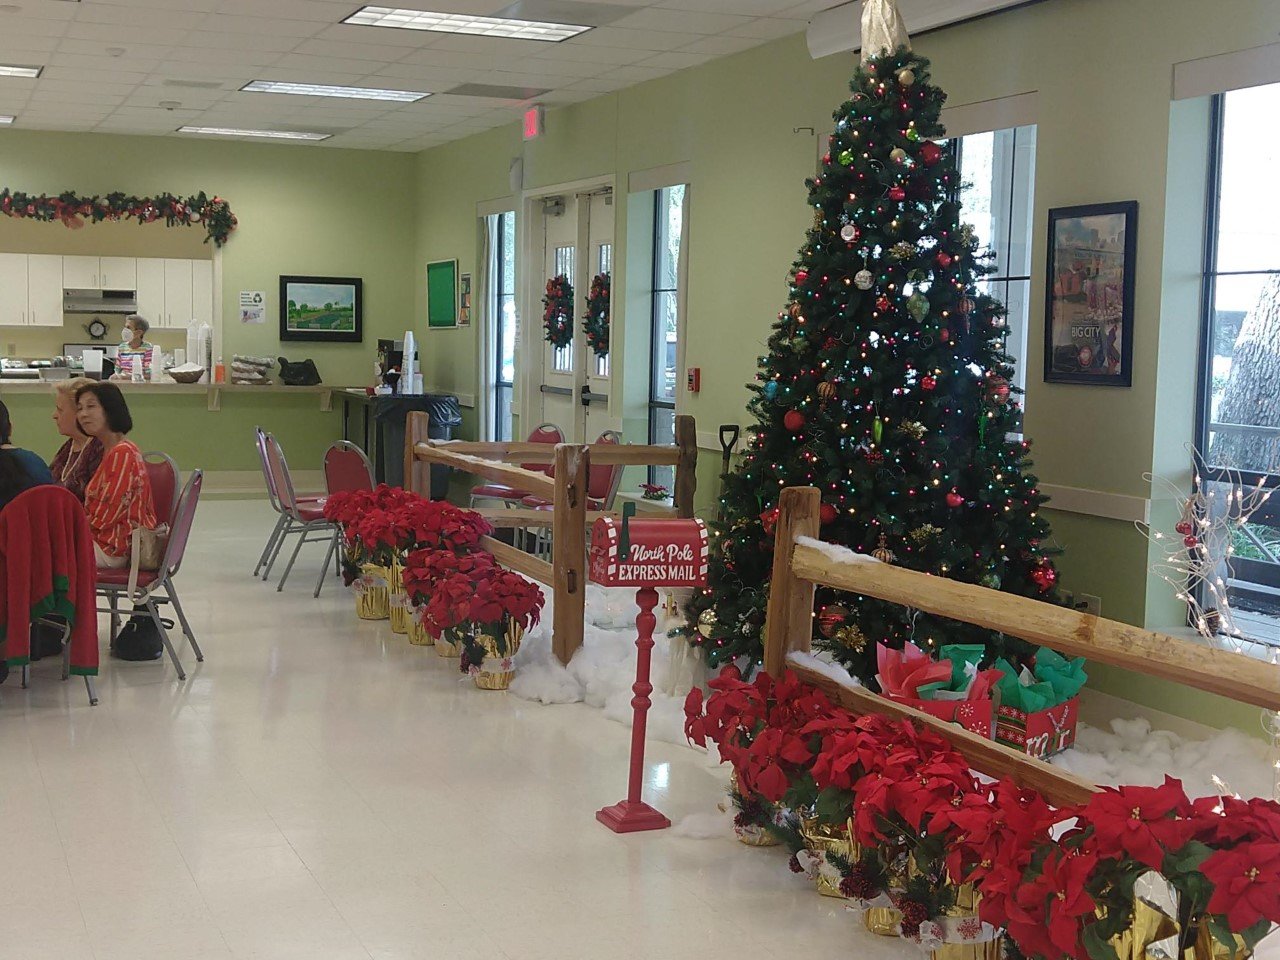 A Christmas tree was among the attractions at the reopening of the Katy Fussell Senior Center.